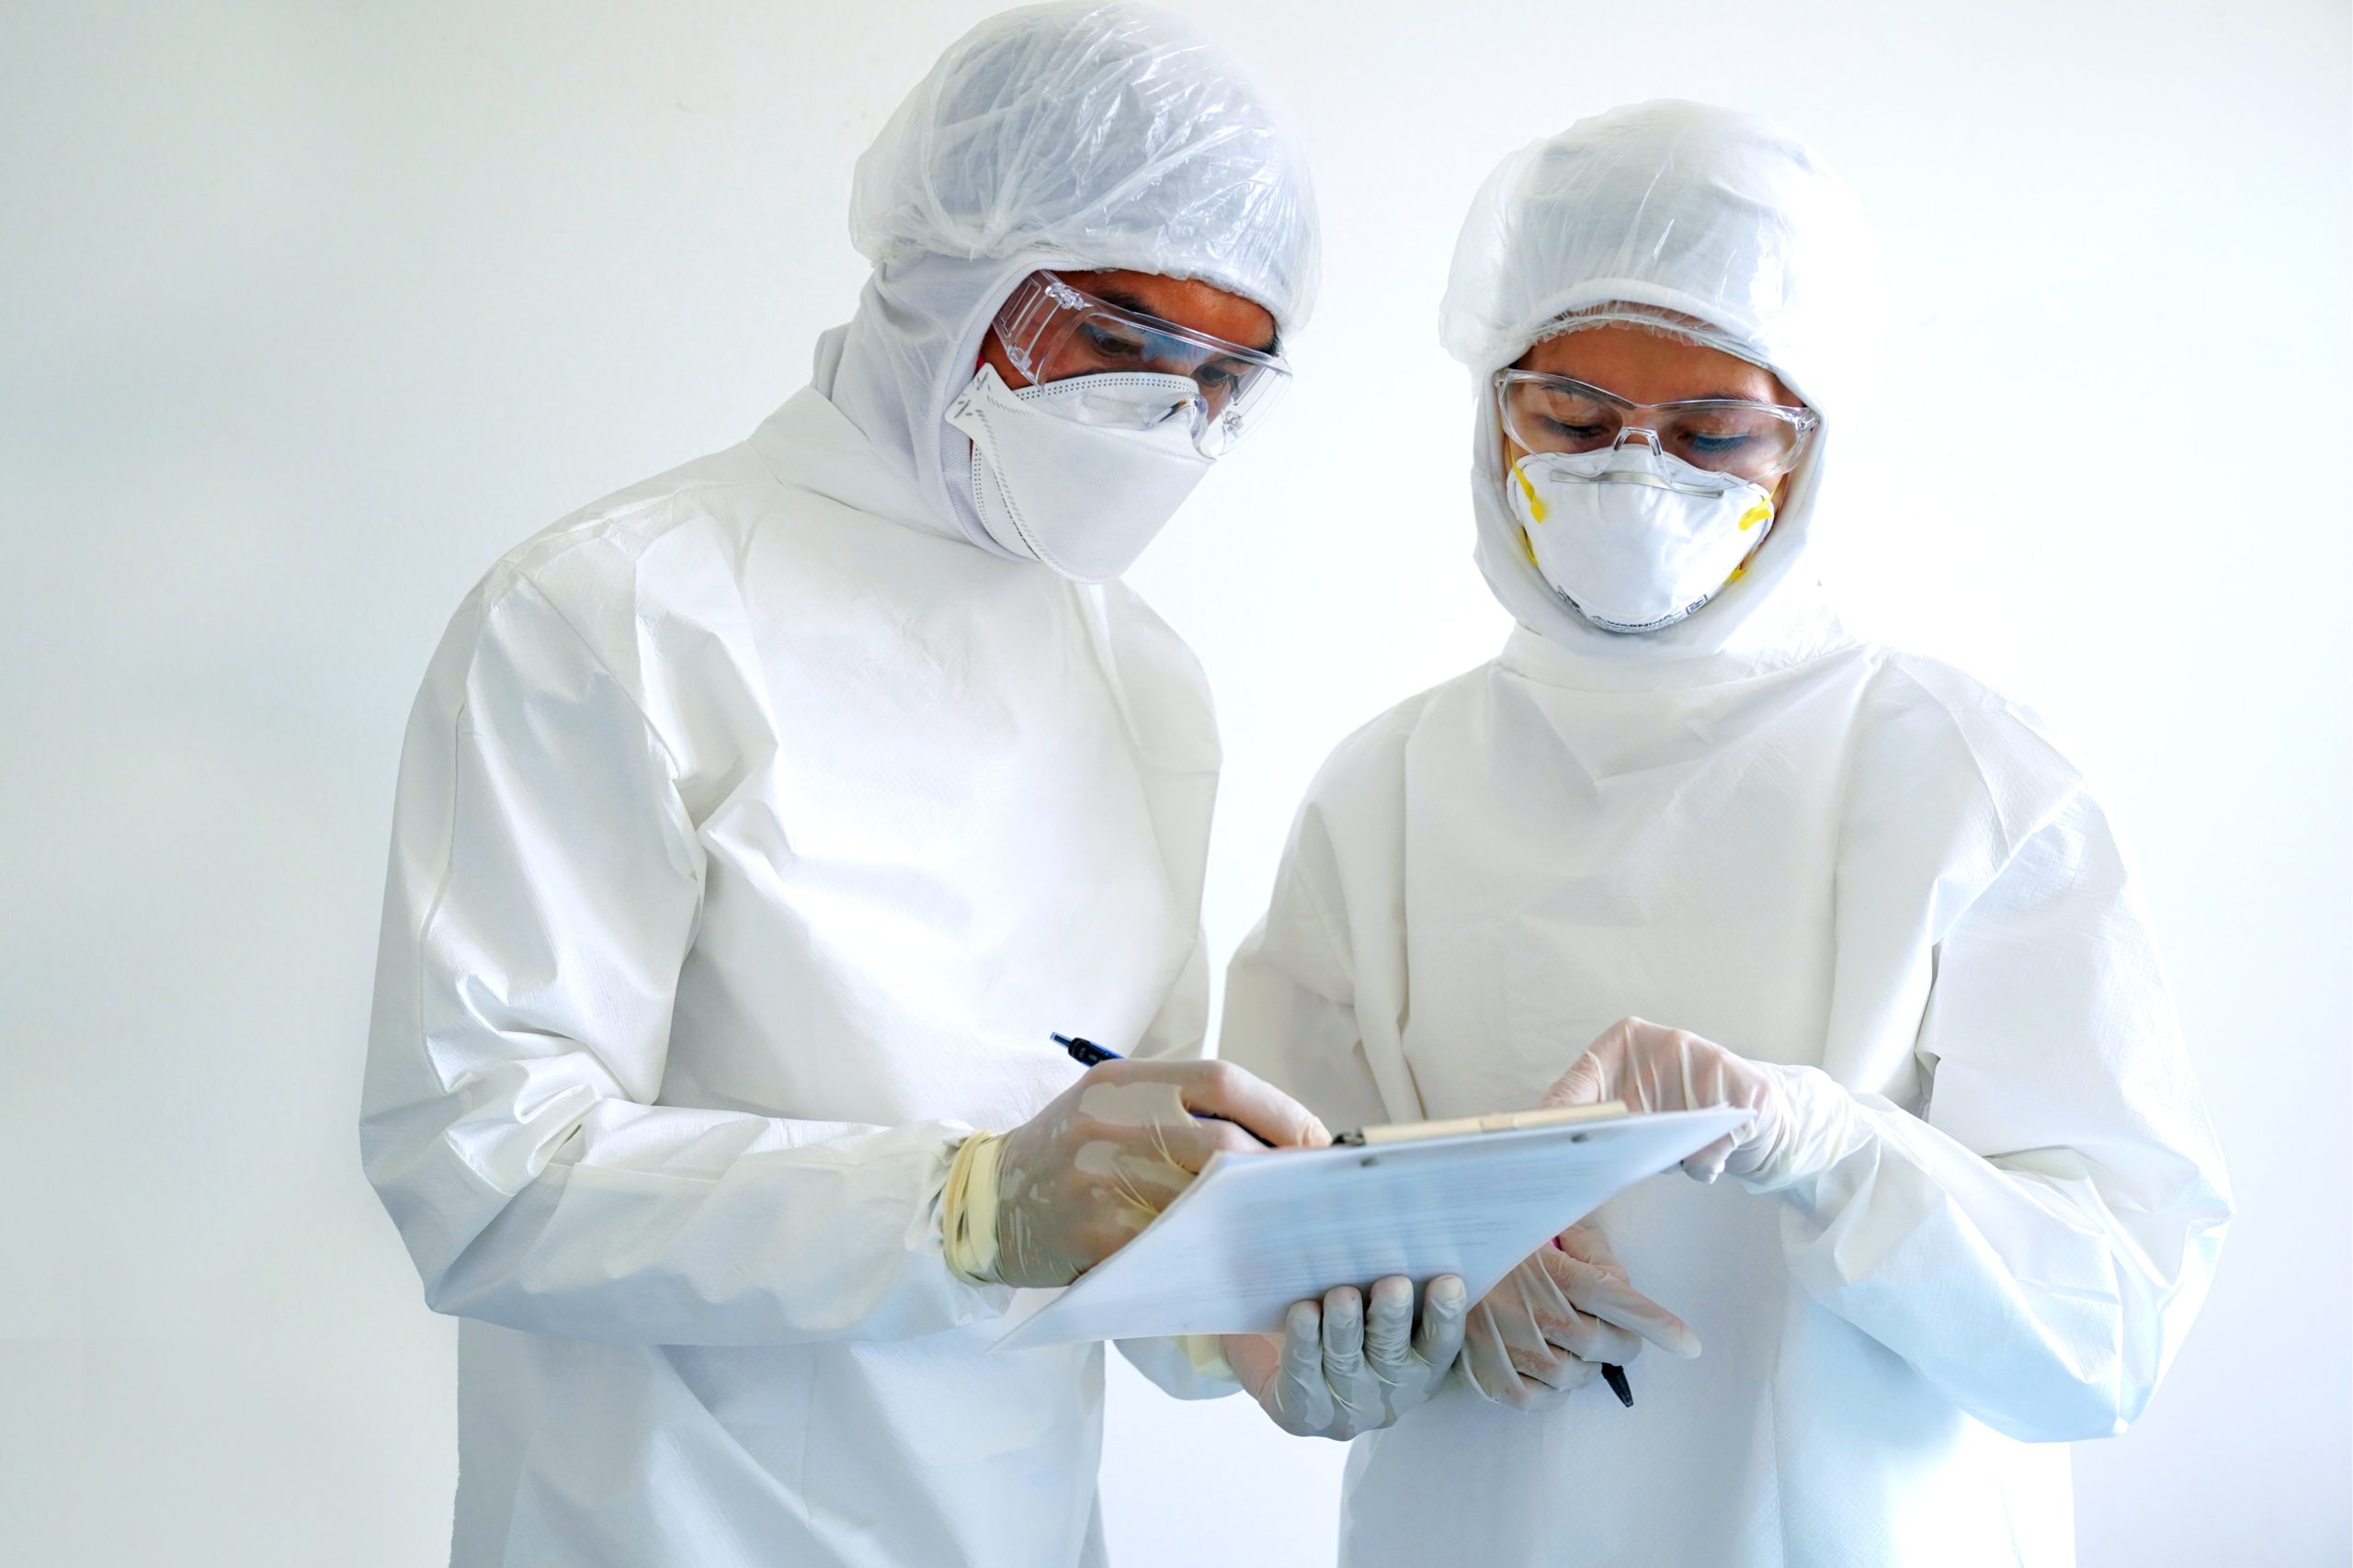 Doctors with PPE making a Plan-demic during Coronavirus outbreak